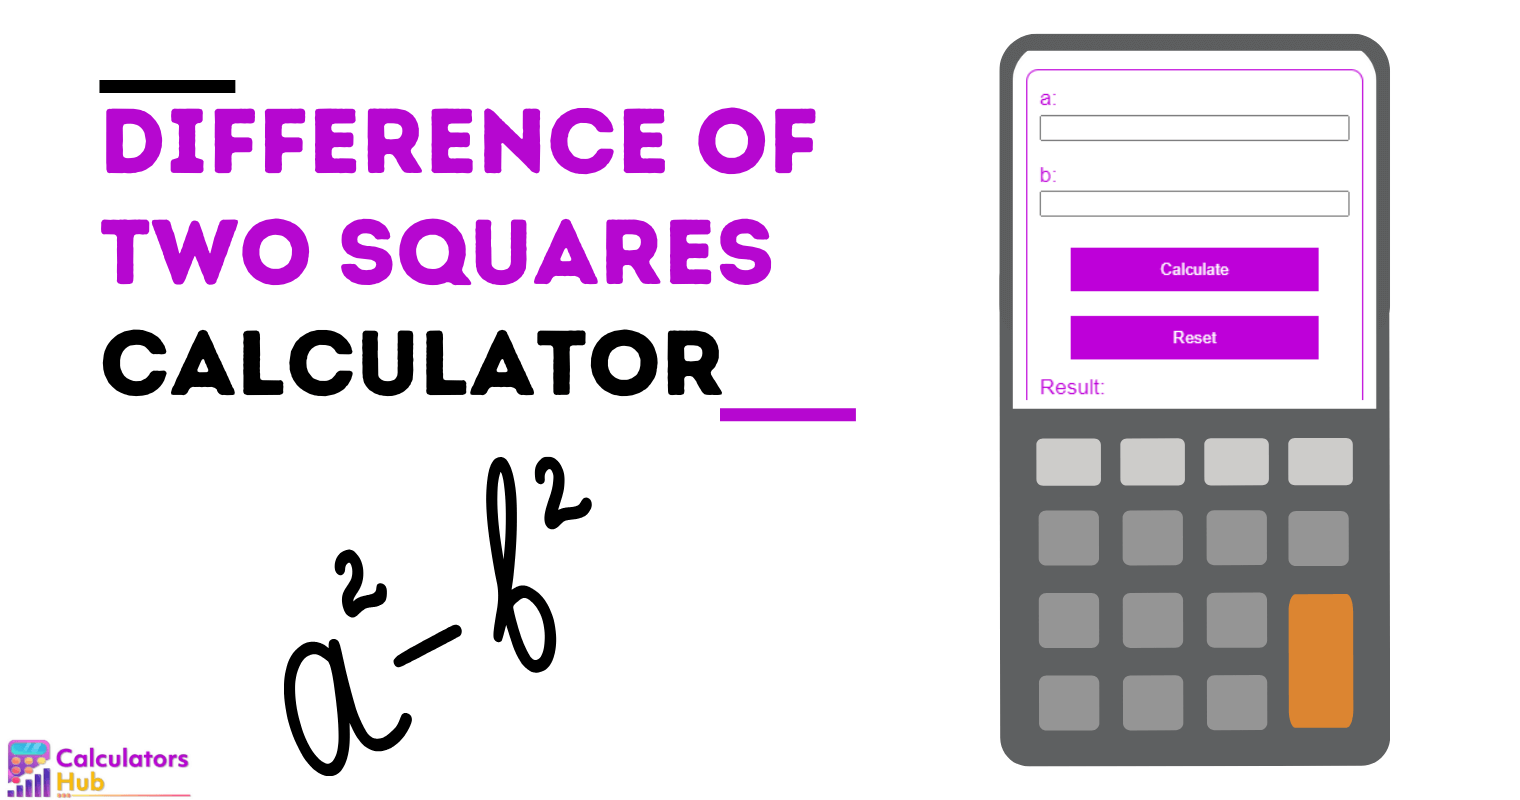 Difference of Two Squares Calculator